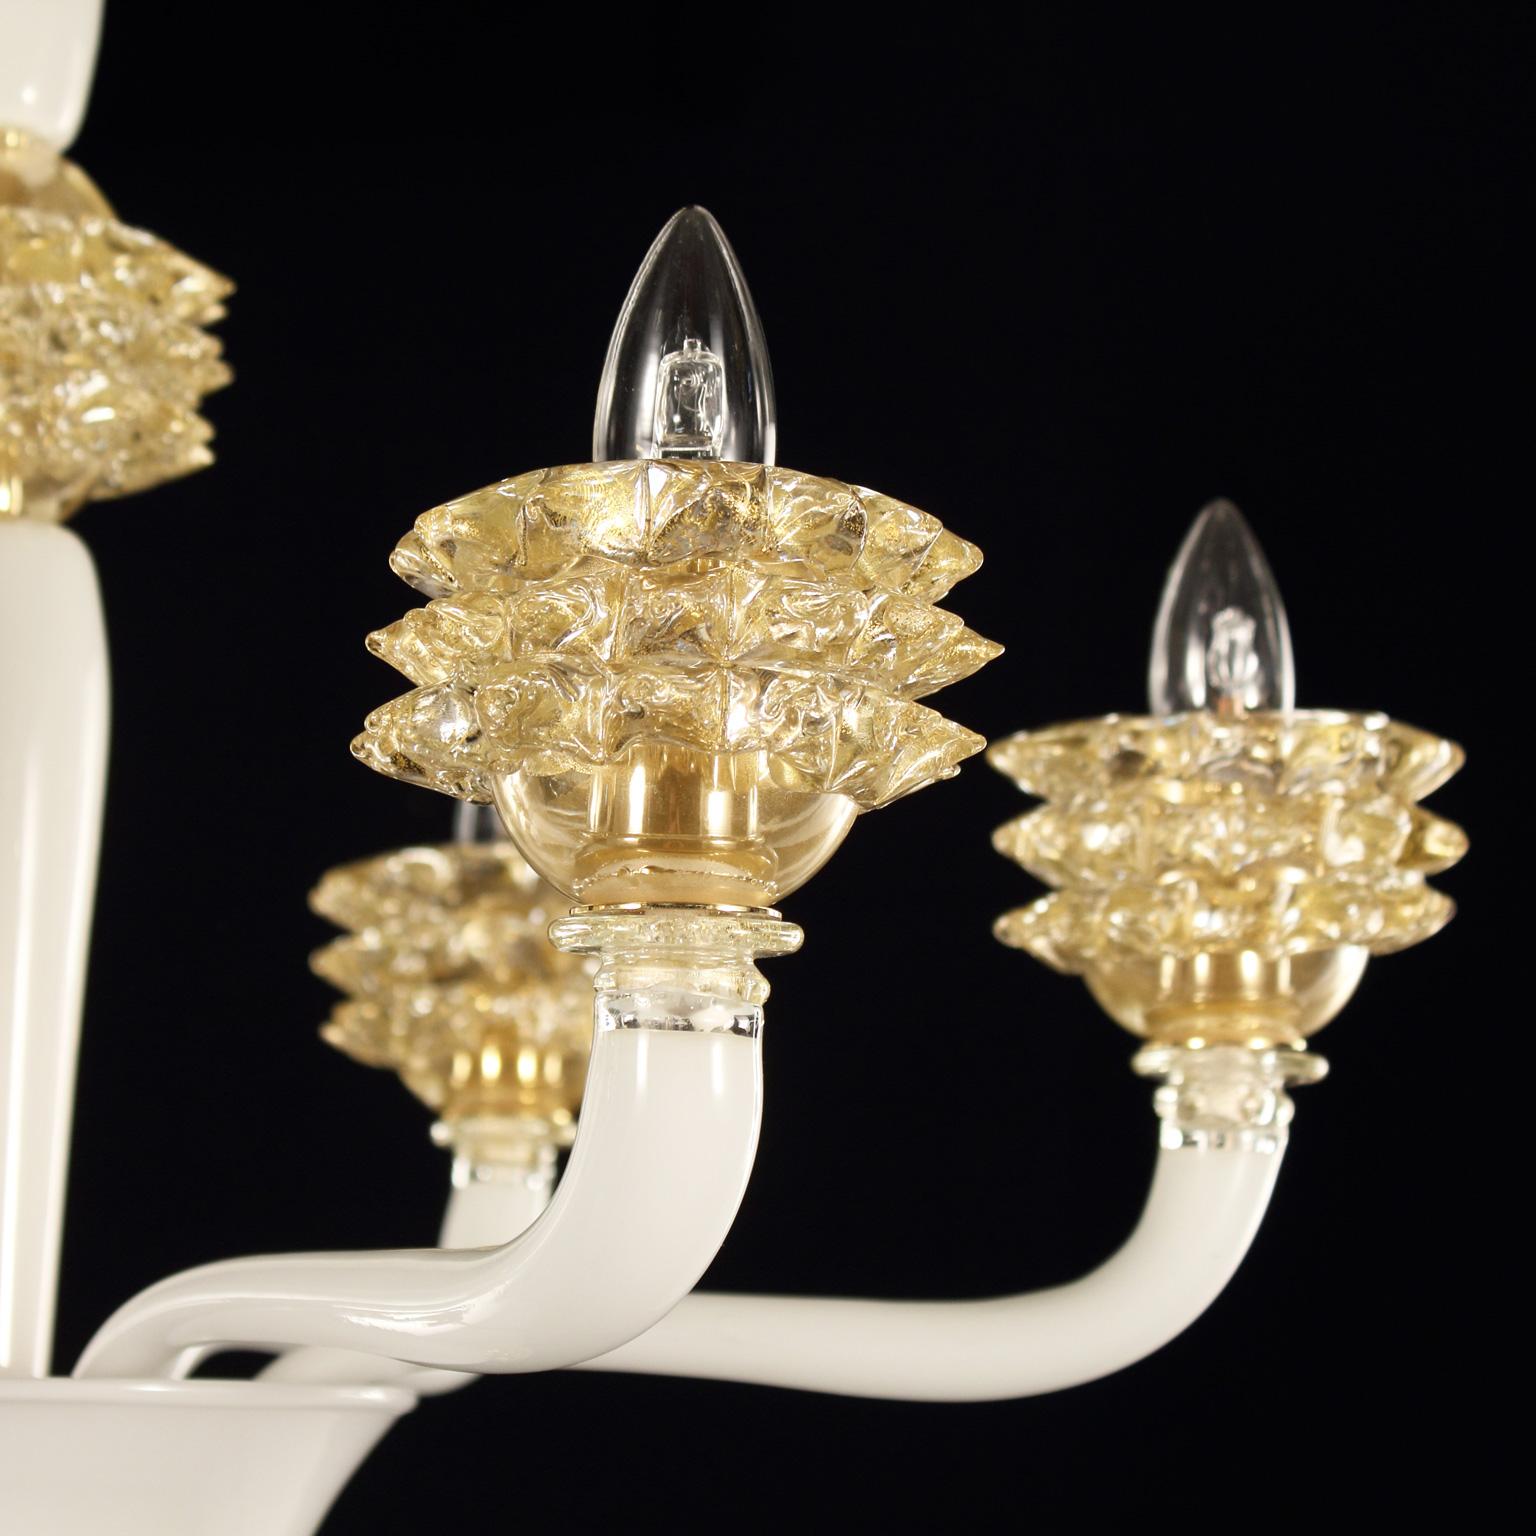 Chandelier 6 arms White Encased Murano Glass Gold Rostri details by Multiforme In New Condition For Sale In Trebaseleghe, IT